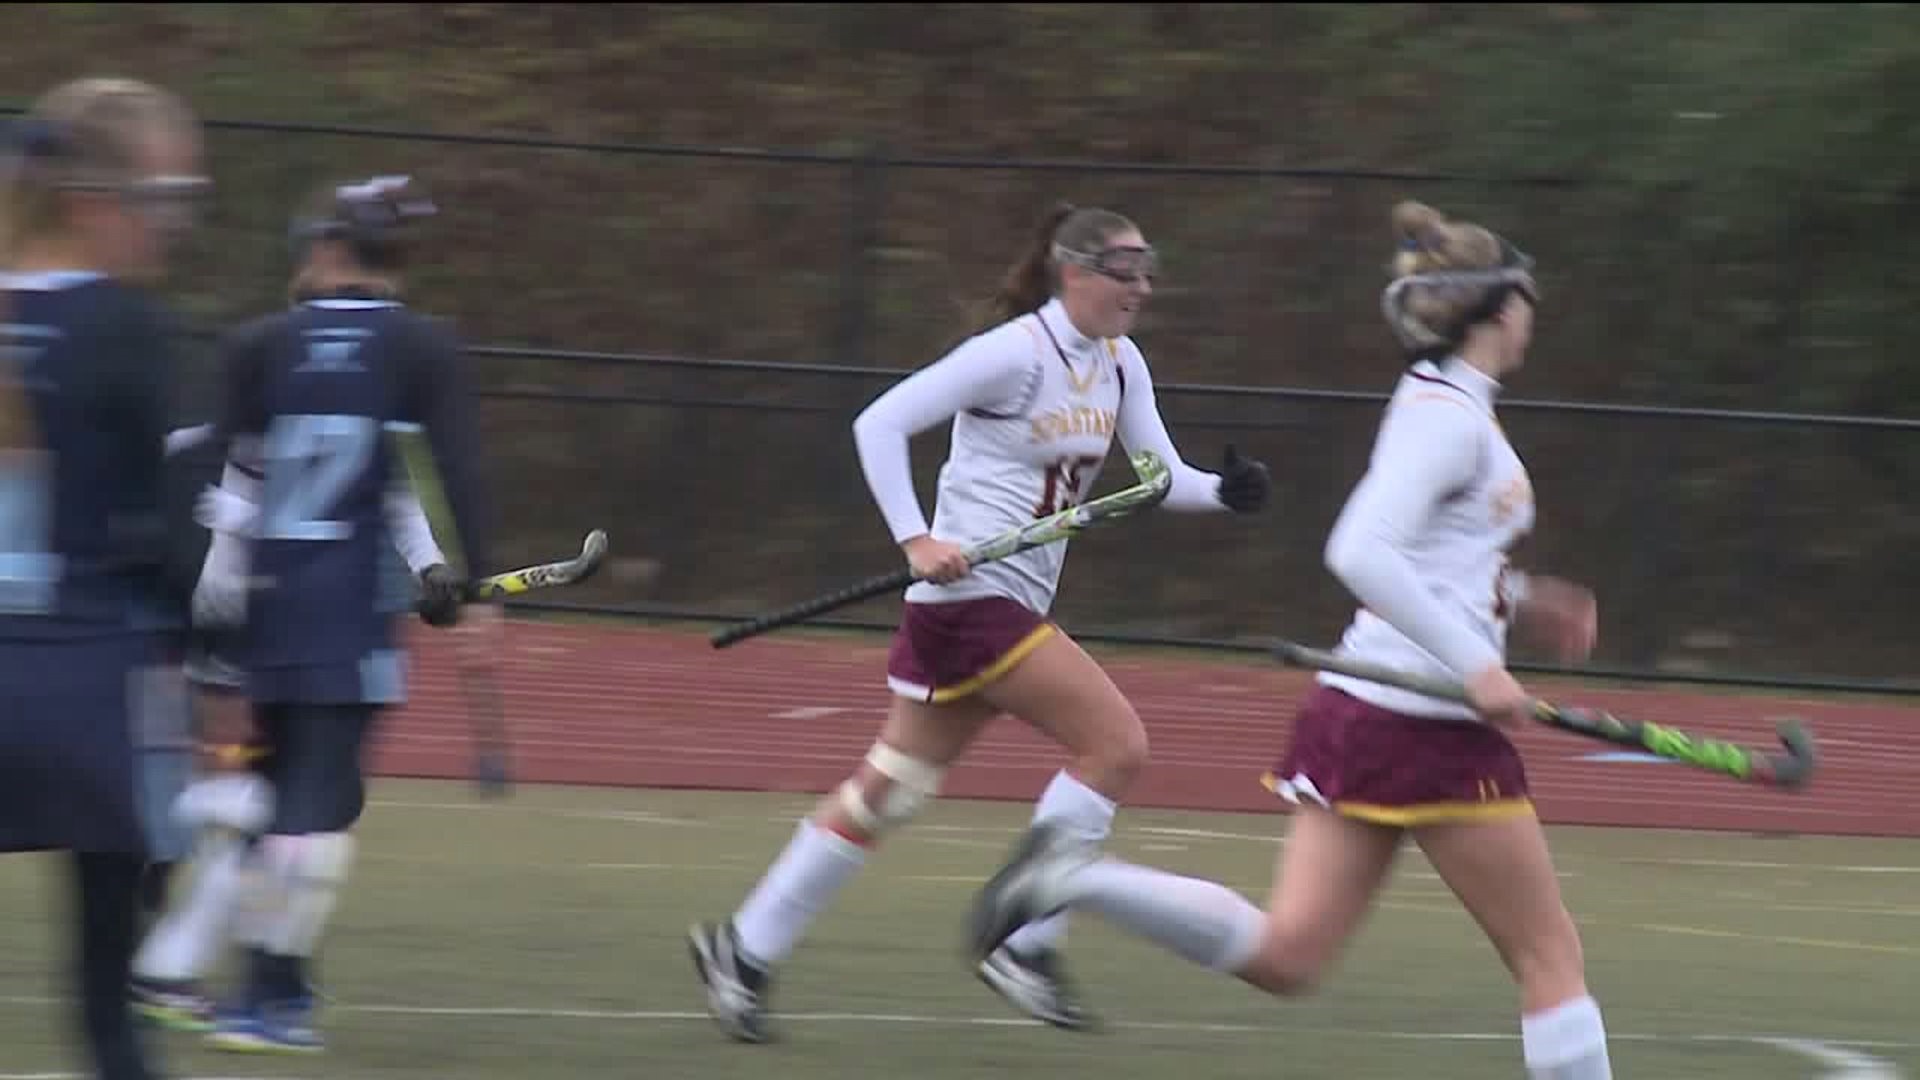 Wyoming Valley West Falls to Villa Maria in State Field Hockey Title